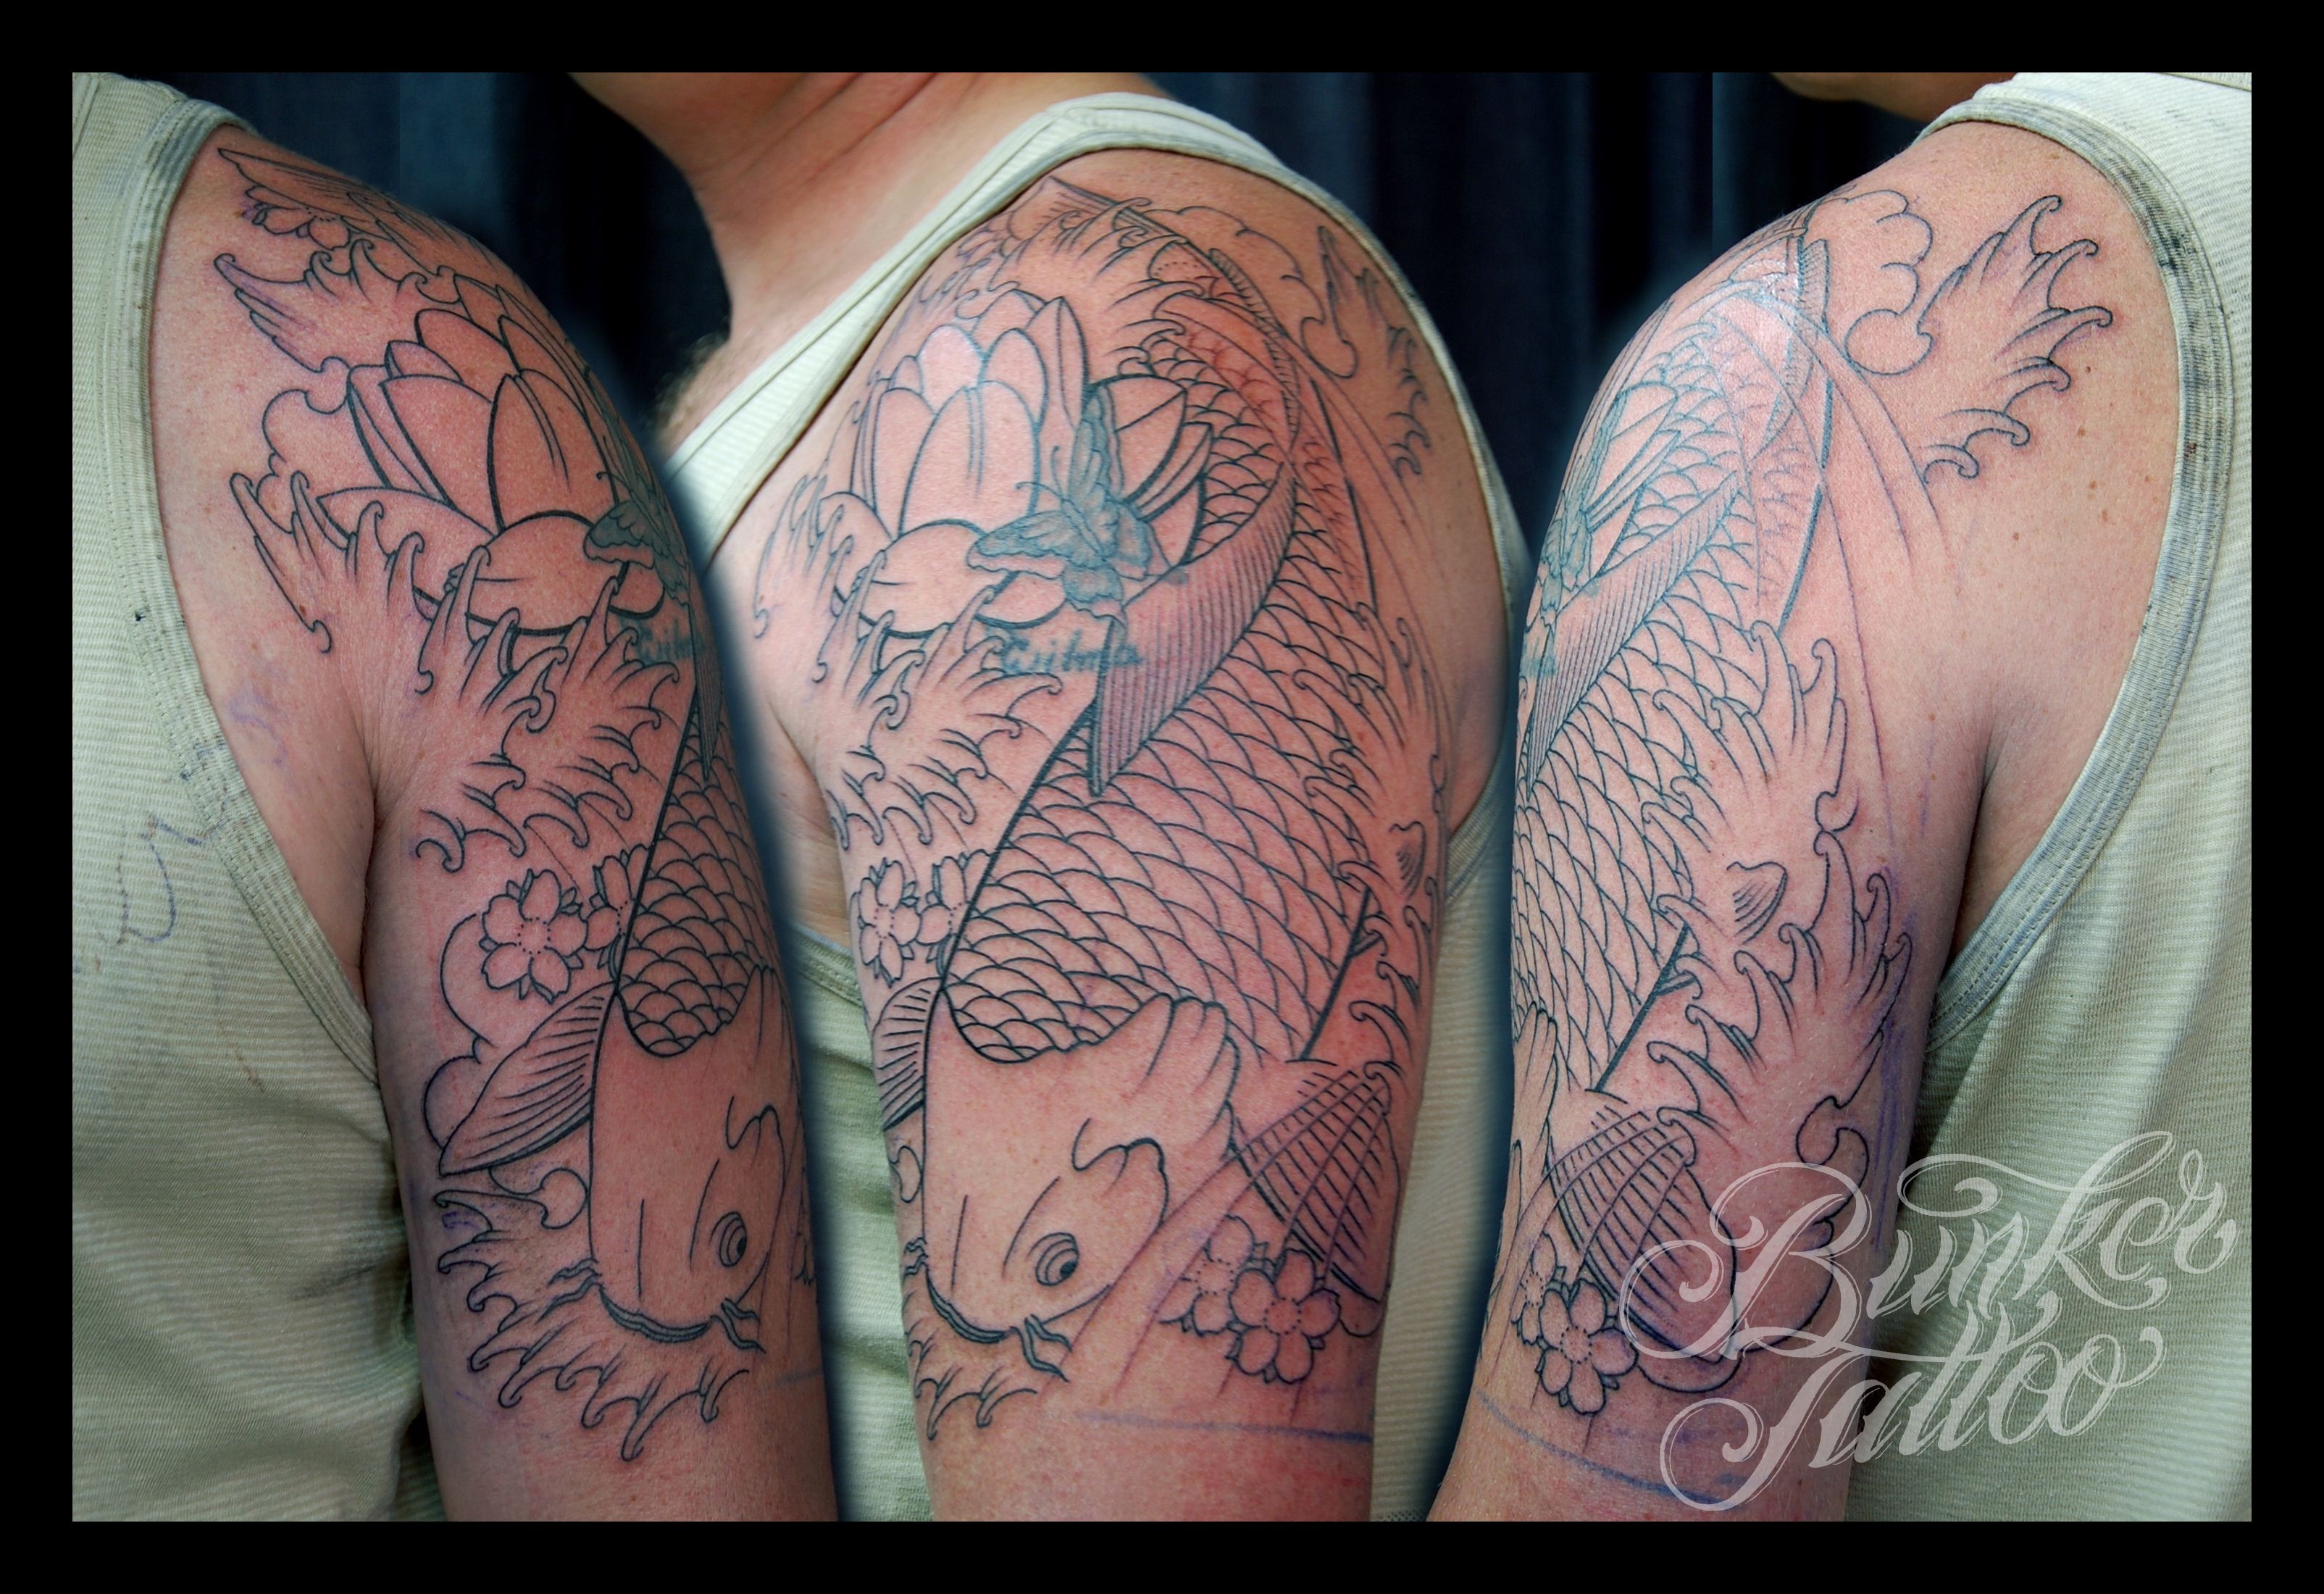 another coverup sleeve